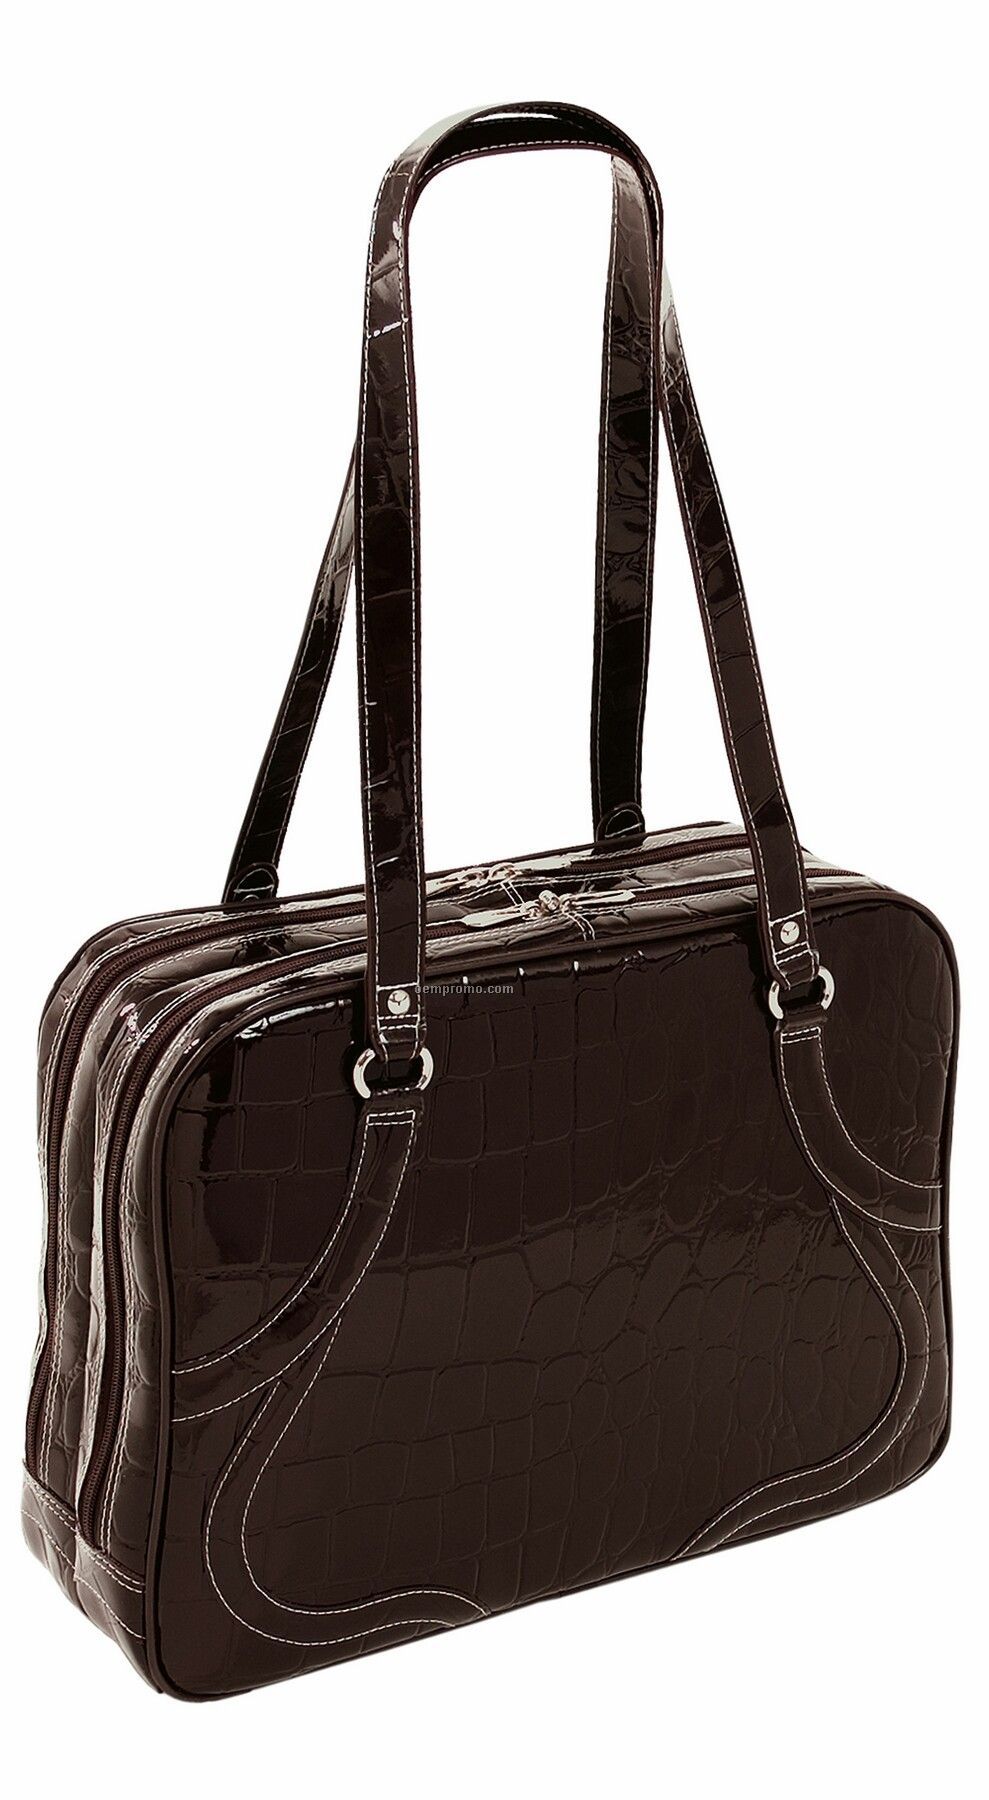 Roma Leather Ladies' Laptop Tote - Chocolate Brown